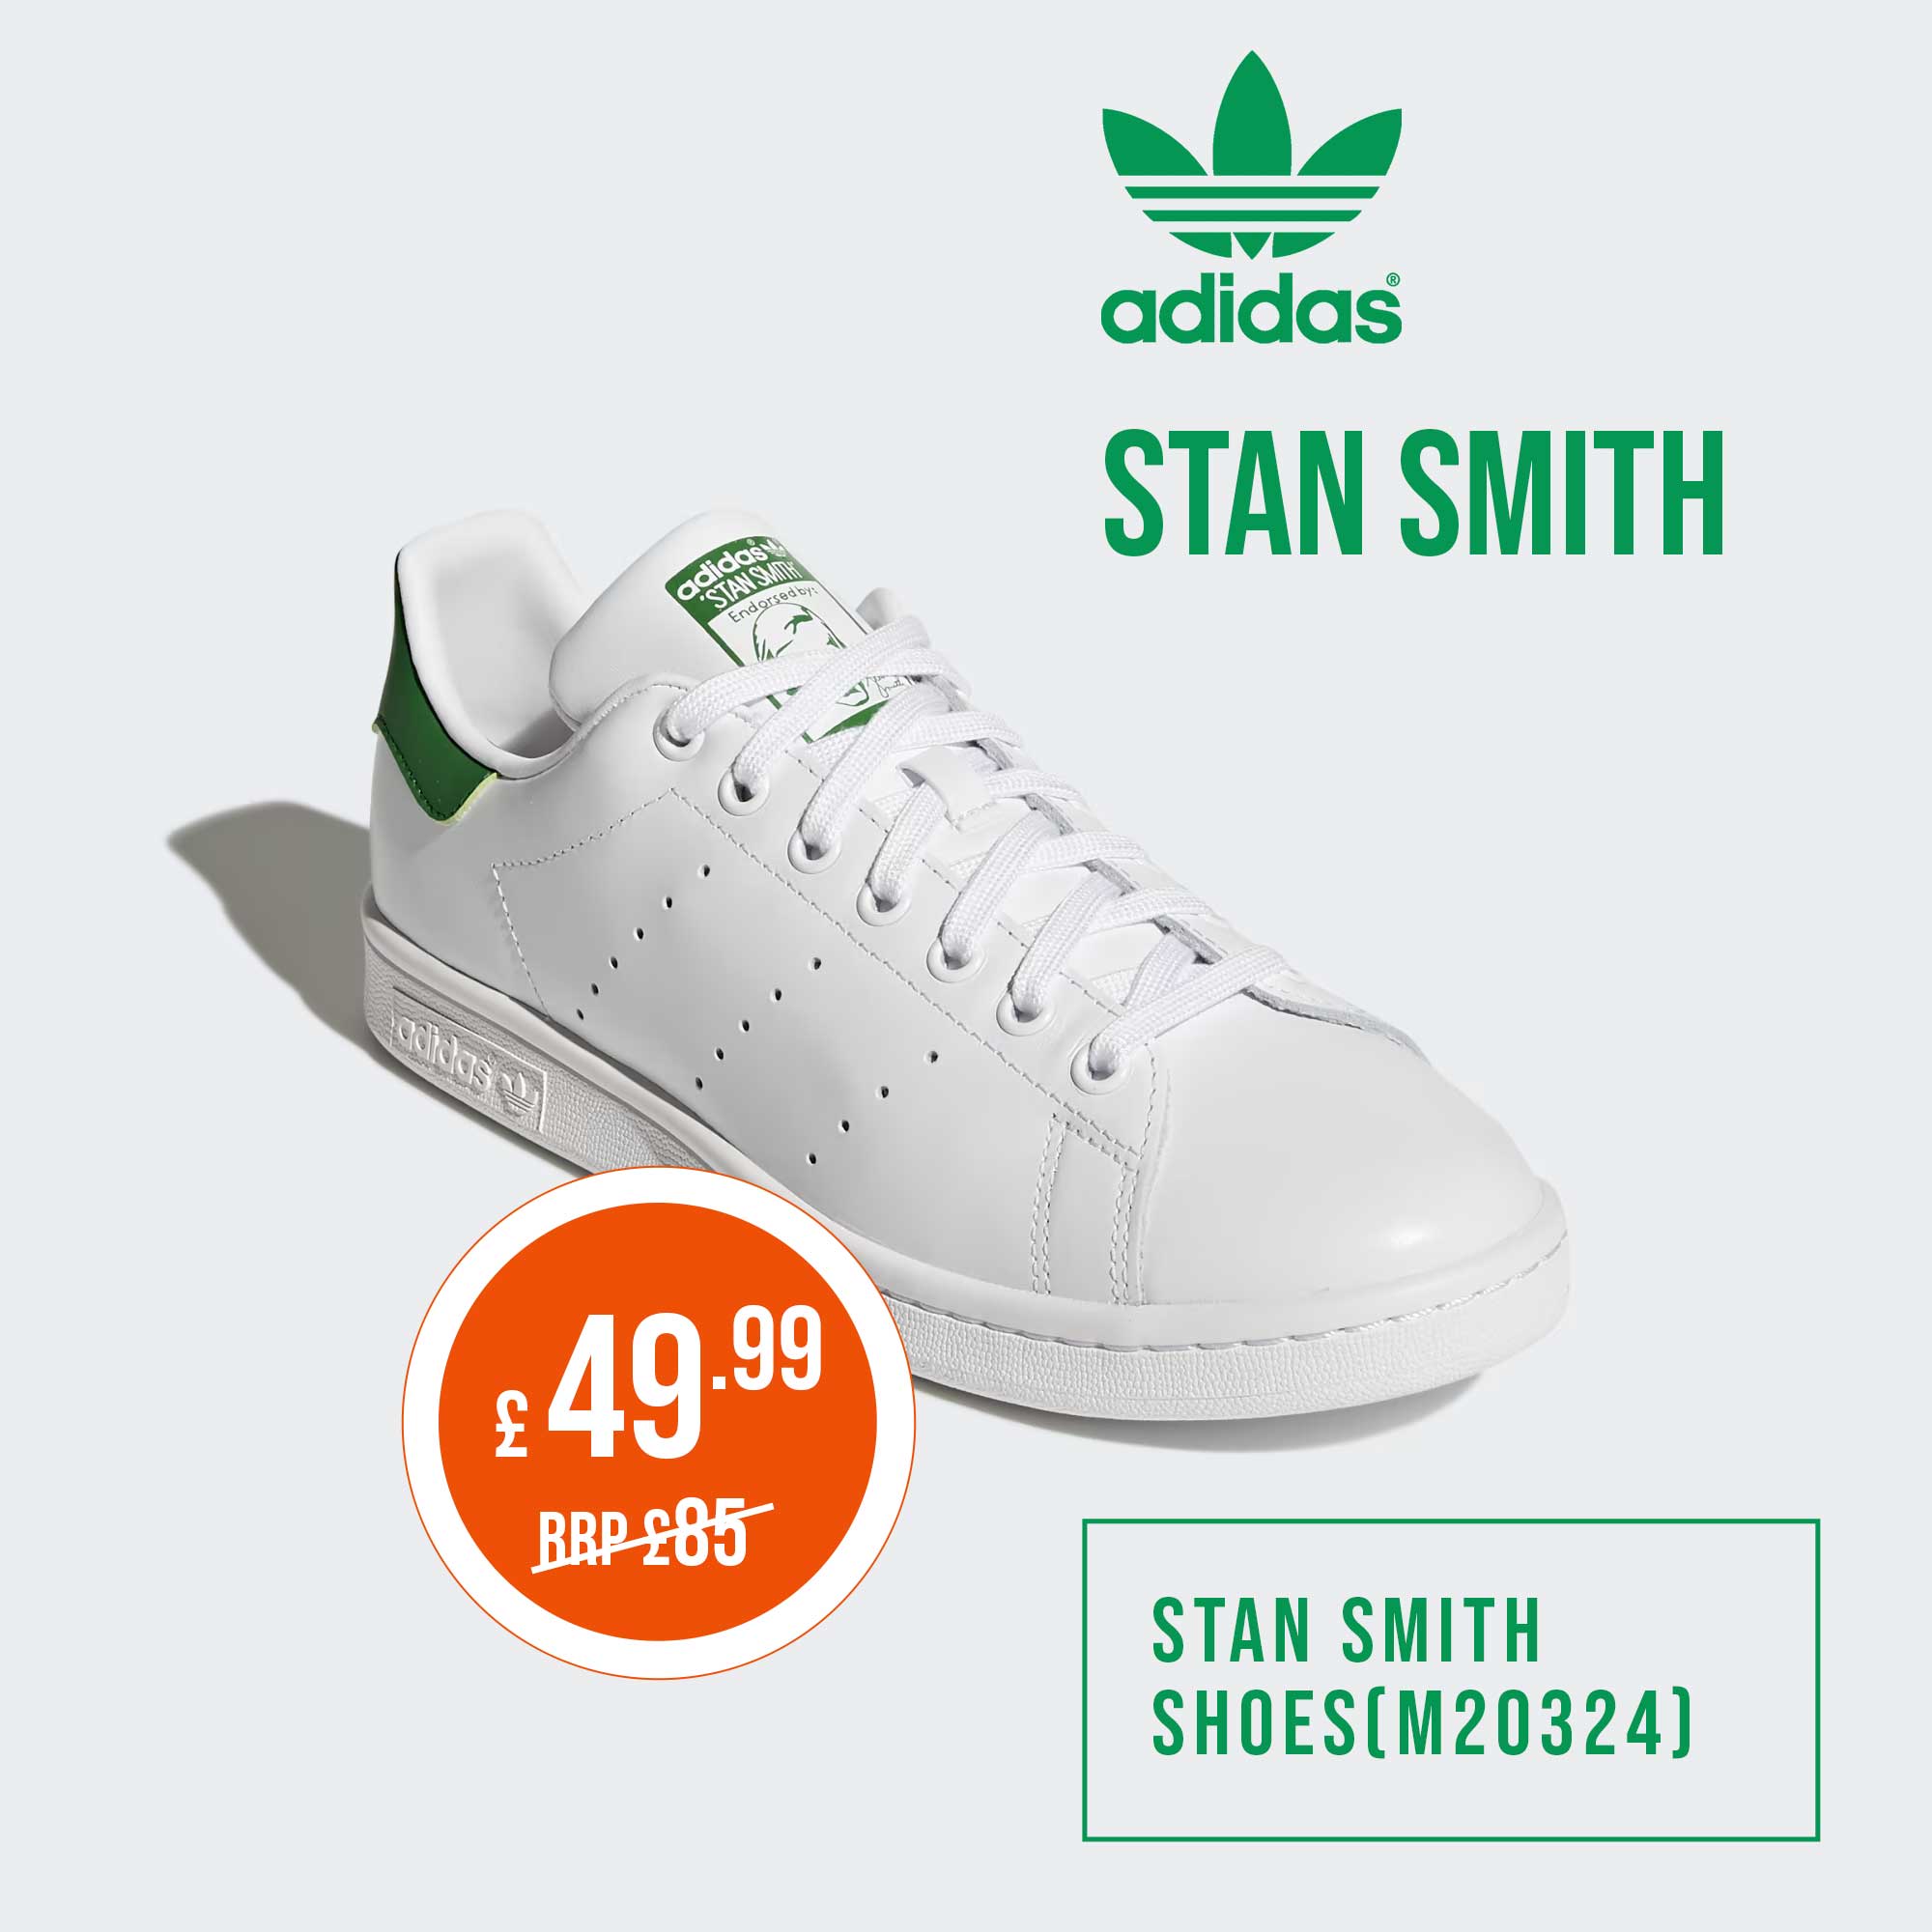 Adidas Stan Smith Shoes (M20324)